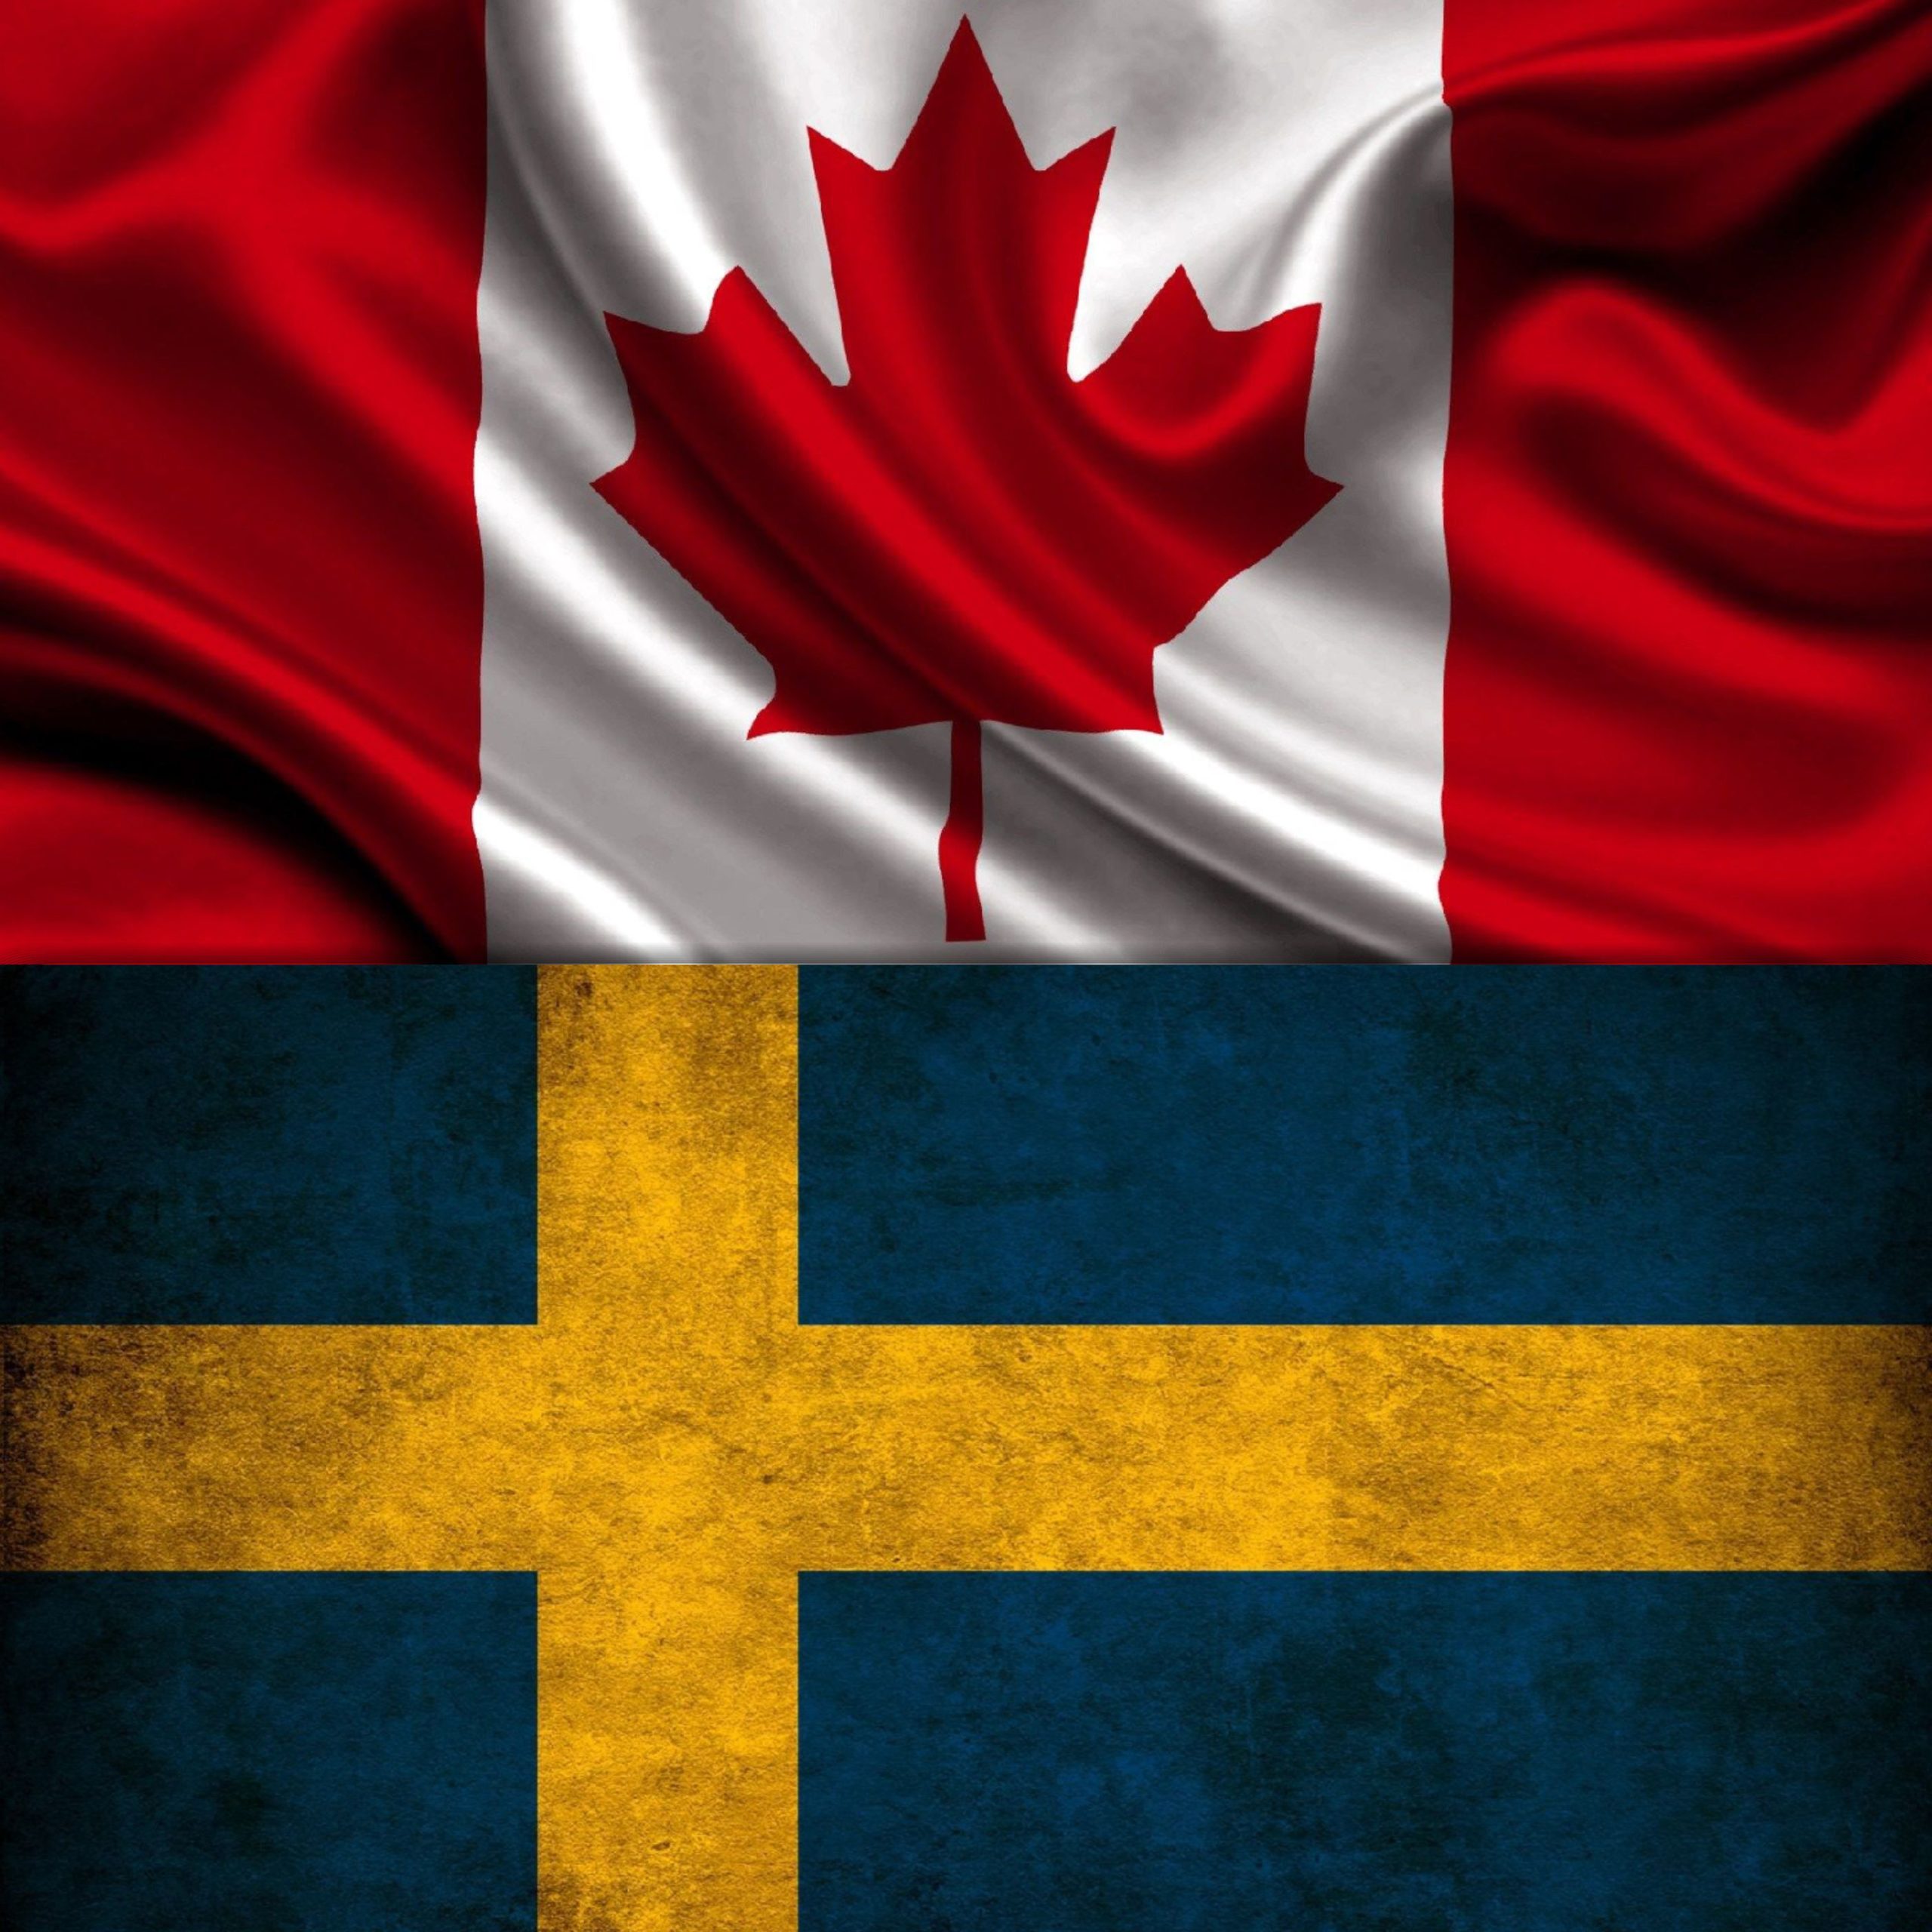 Canada Or Sweden